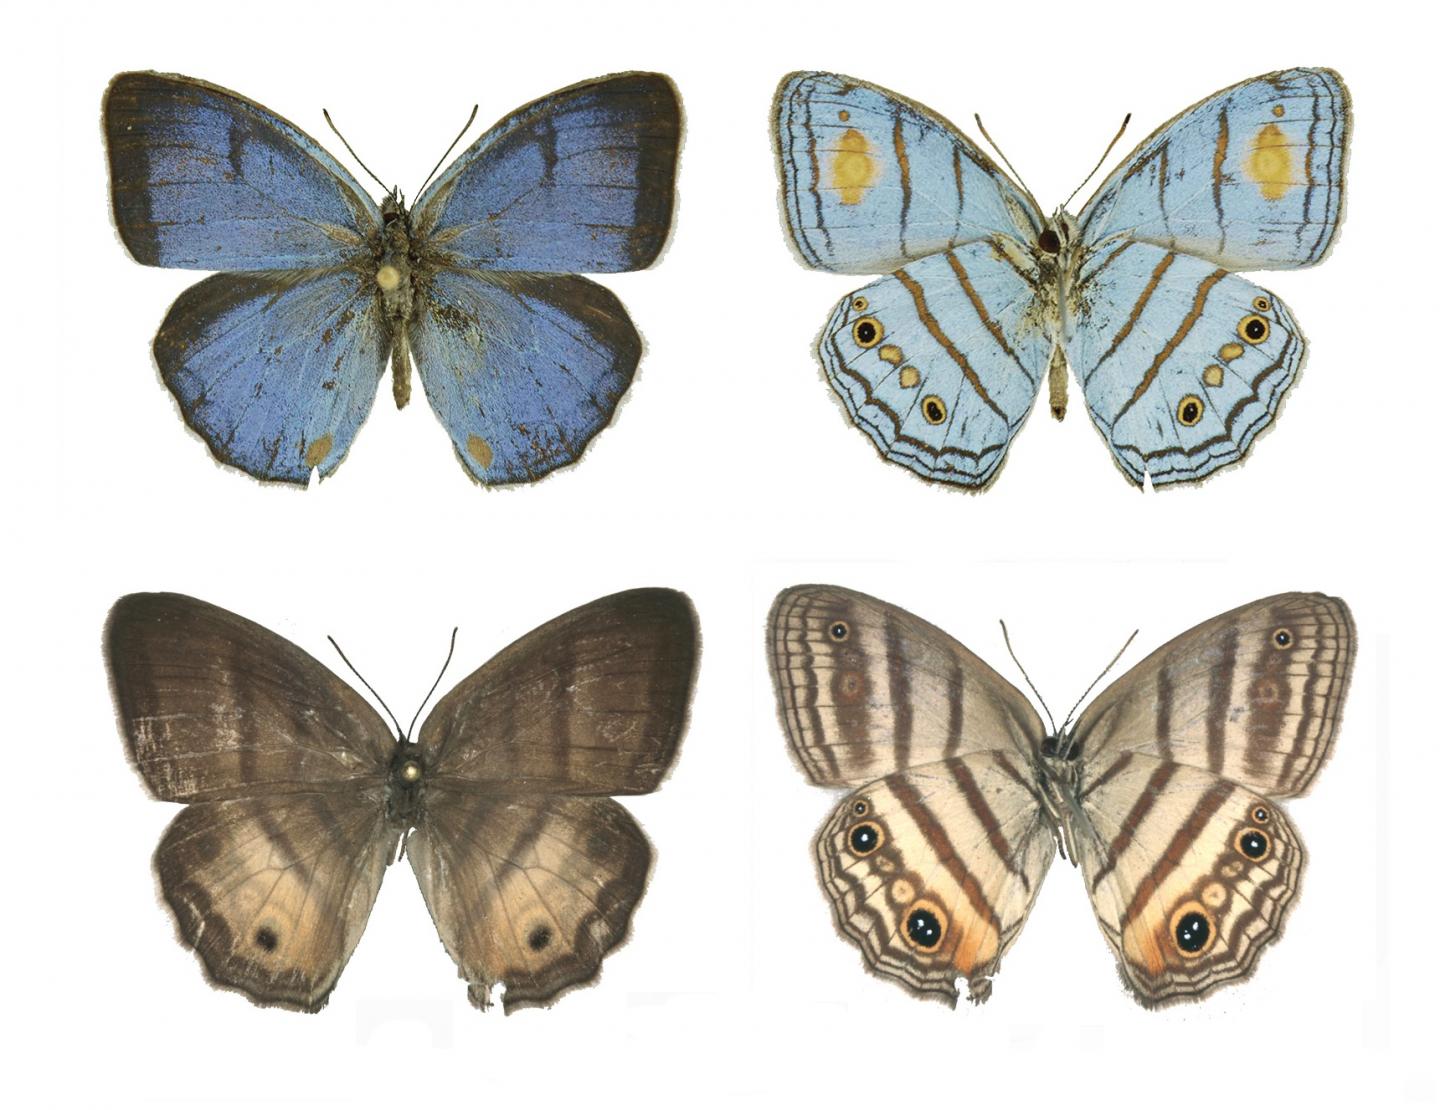 Mistaken for Different Species, Male and Female Butterflies Linked by DNA